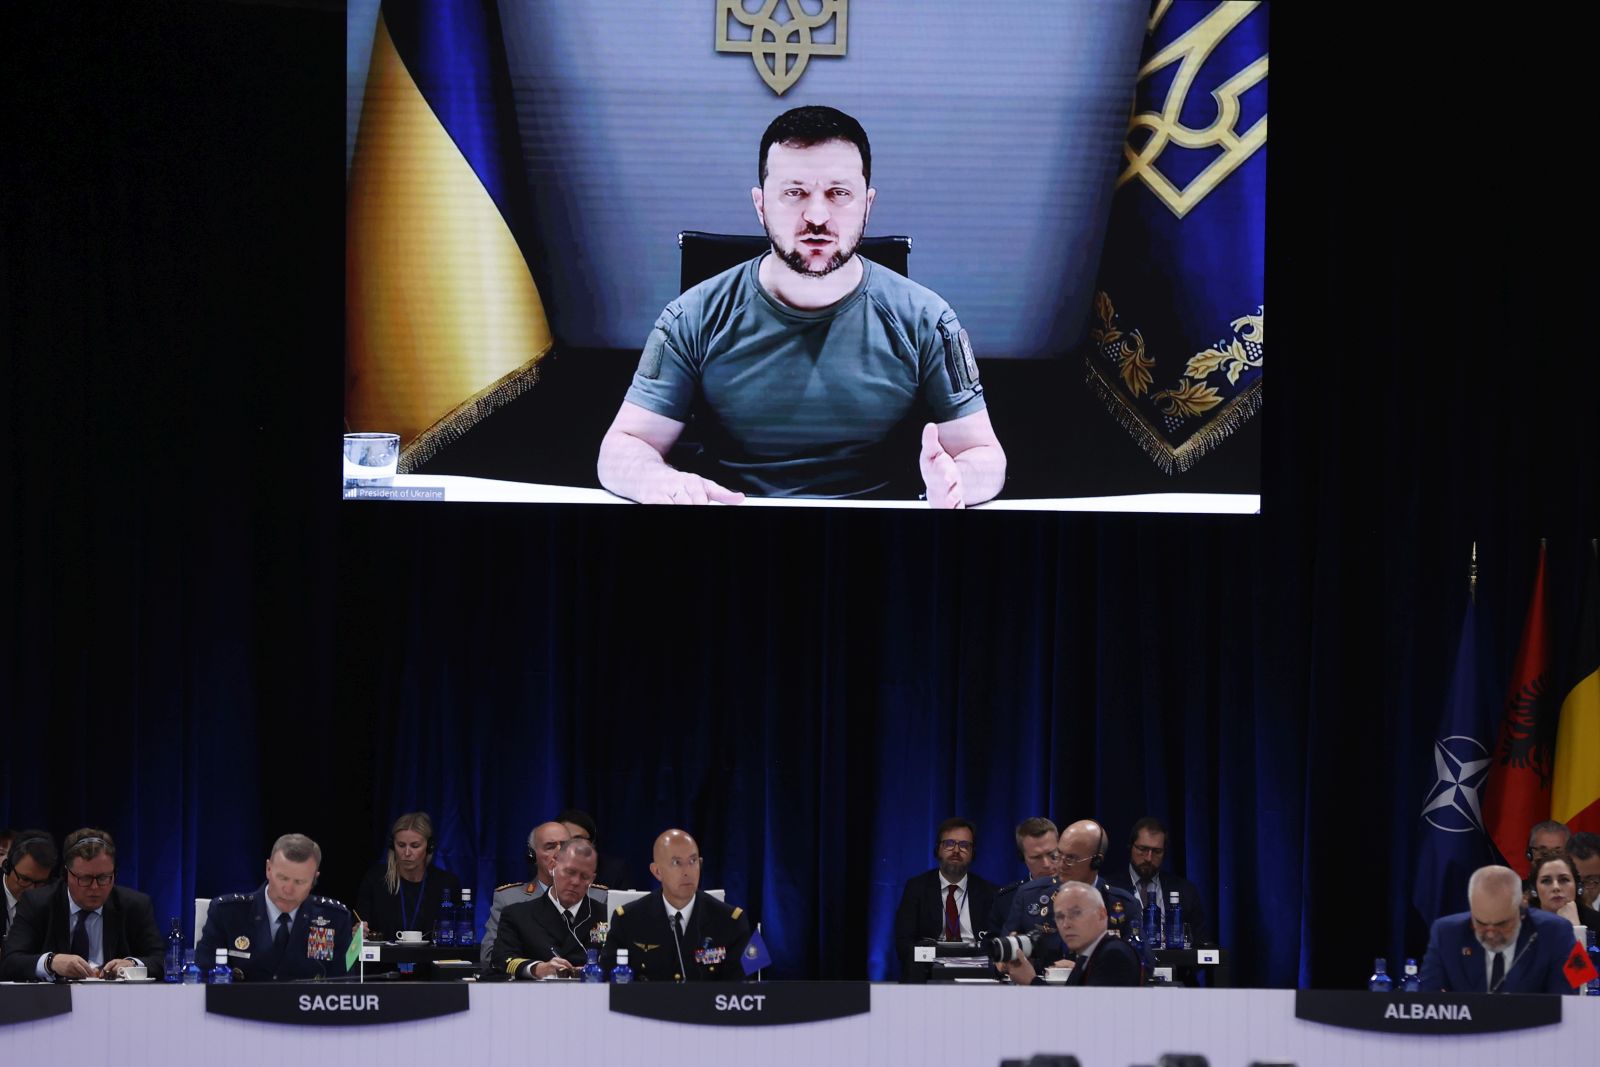 epa10134565 (FILE) - Ukrainian President Volodymyr Zelensky (on the screen), delivers a speech as he attends by video conference a meeting during the first day of the NATO Summit at IFEMA Convention Center, in Madrid, Spain, 29 June 2022. (Issued 23 August 2022). Ukraine marks, on 24 August 2022, six months since the war with Russia started.  EPA/Juan Carlos Hidalgo  ATTENTION: This Image is part of a PHOTO SET